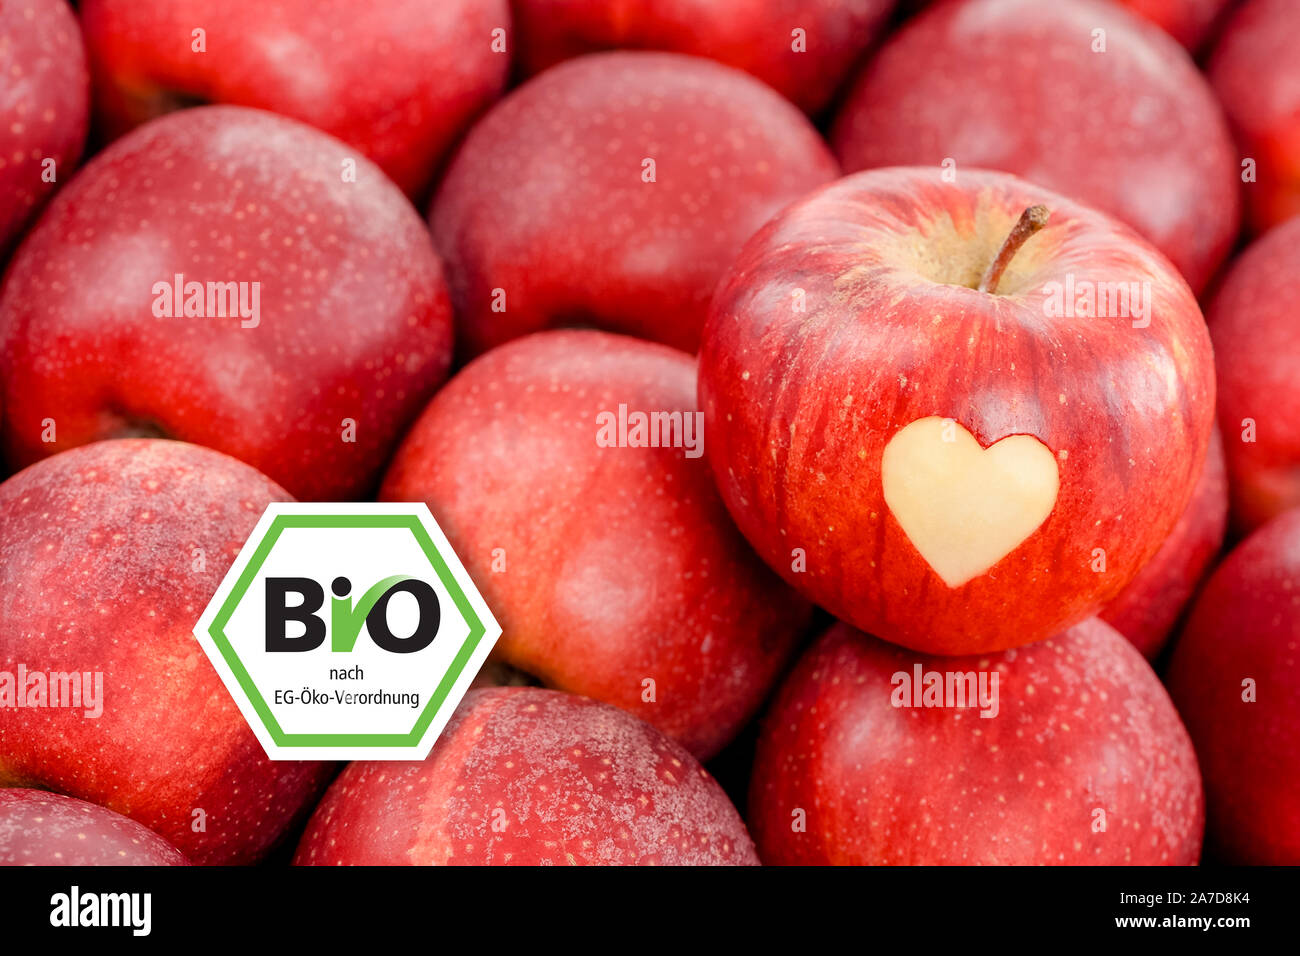 - apfel images Rote photography hi-res and Alamy stock